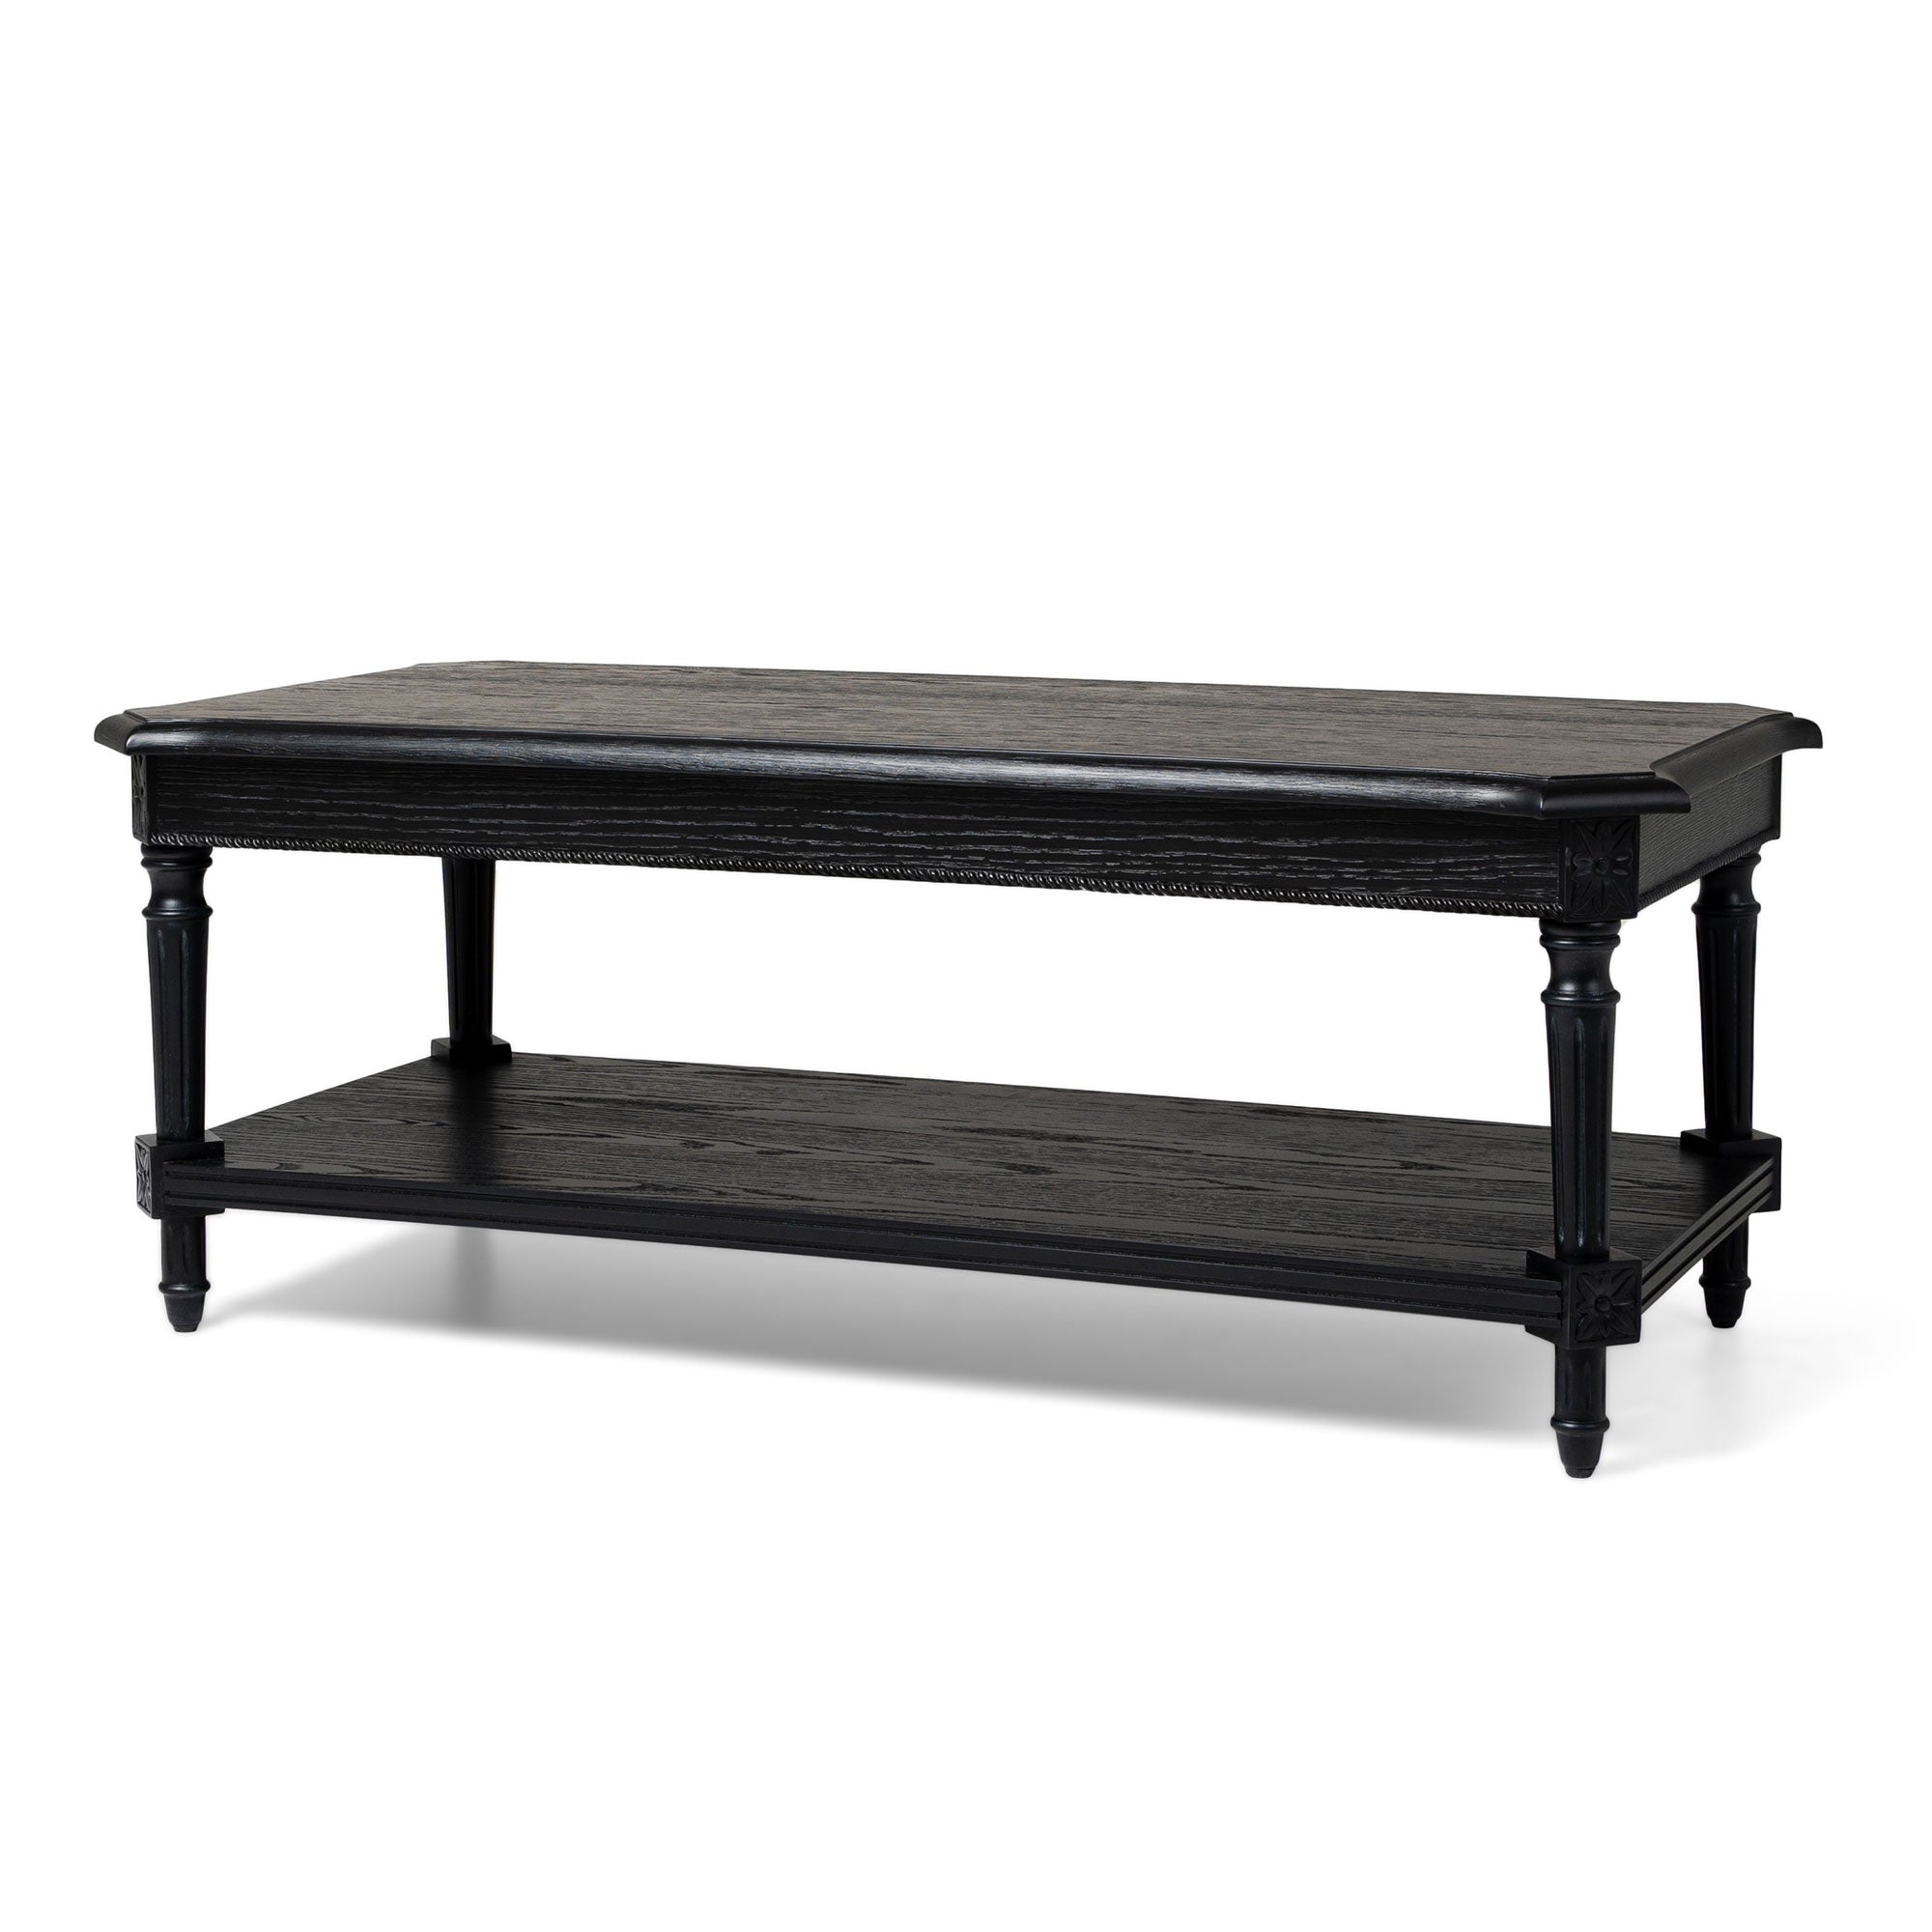 Pullman Traditional Rectangular Wooden Coffee Table in Antiqued Black Finish in Accent Tables by Maven Lane